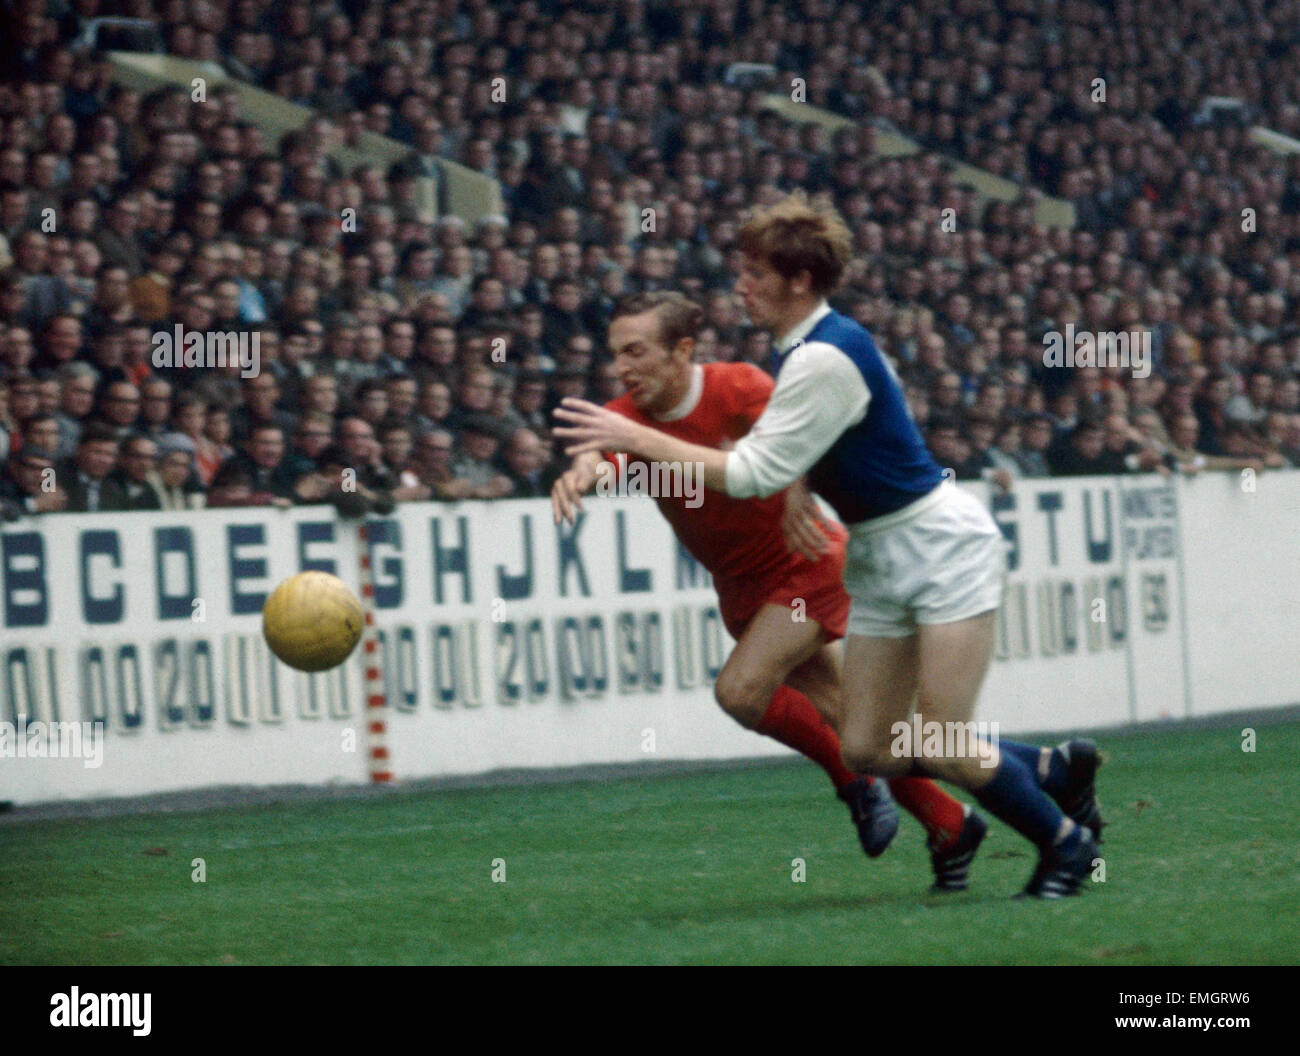 English League Division One match at Hillsborough. Sheffield Wednesday 1 v Liverpool 1. Wedneday's Sam Ellis battles Peter Thompson of Liverpool for the ball. 30th August 1969. Stock Photo